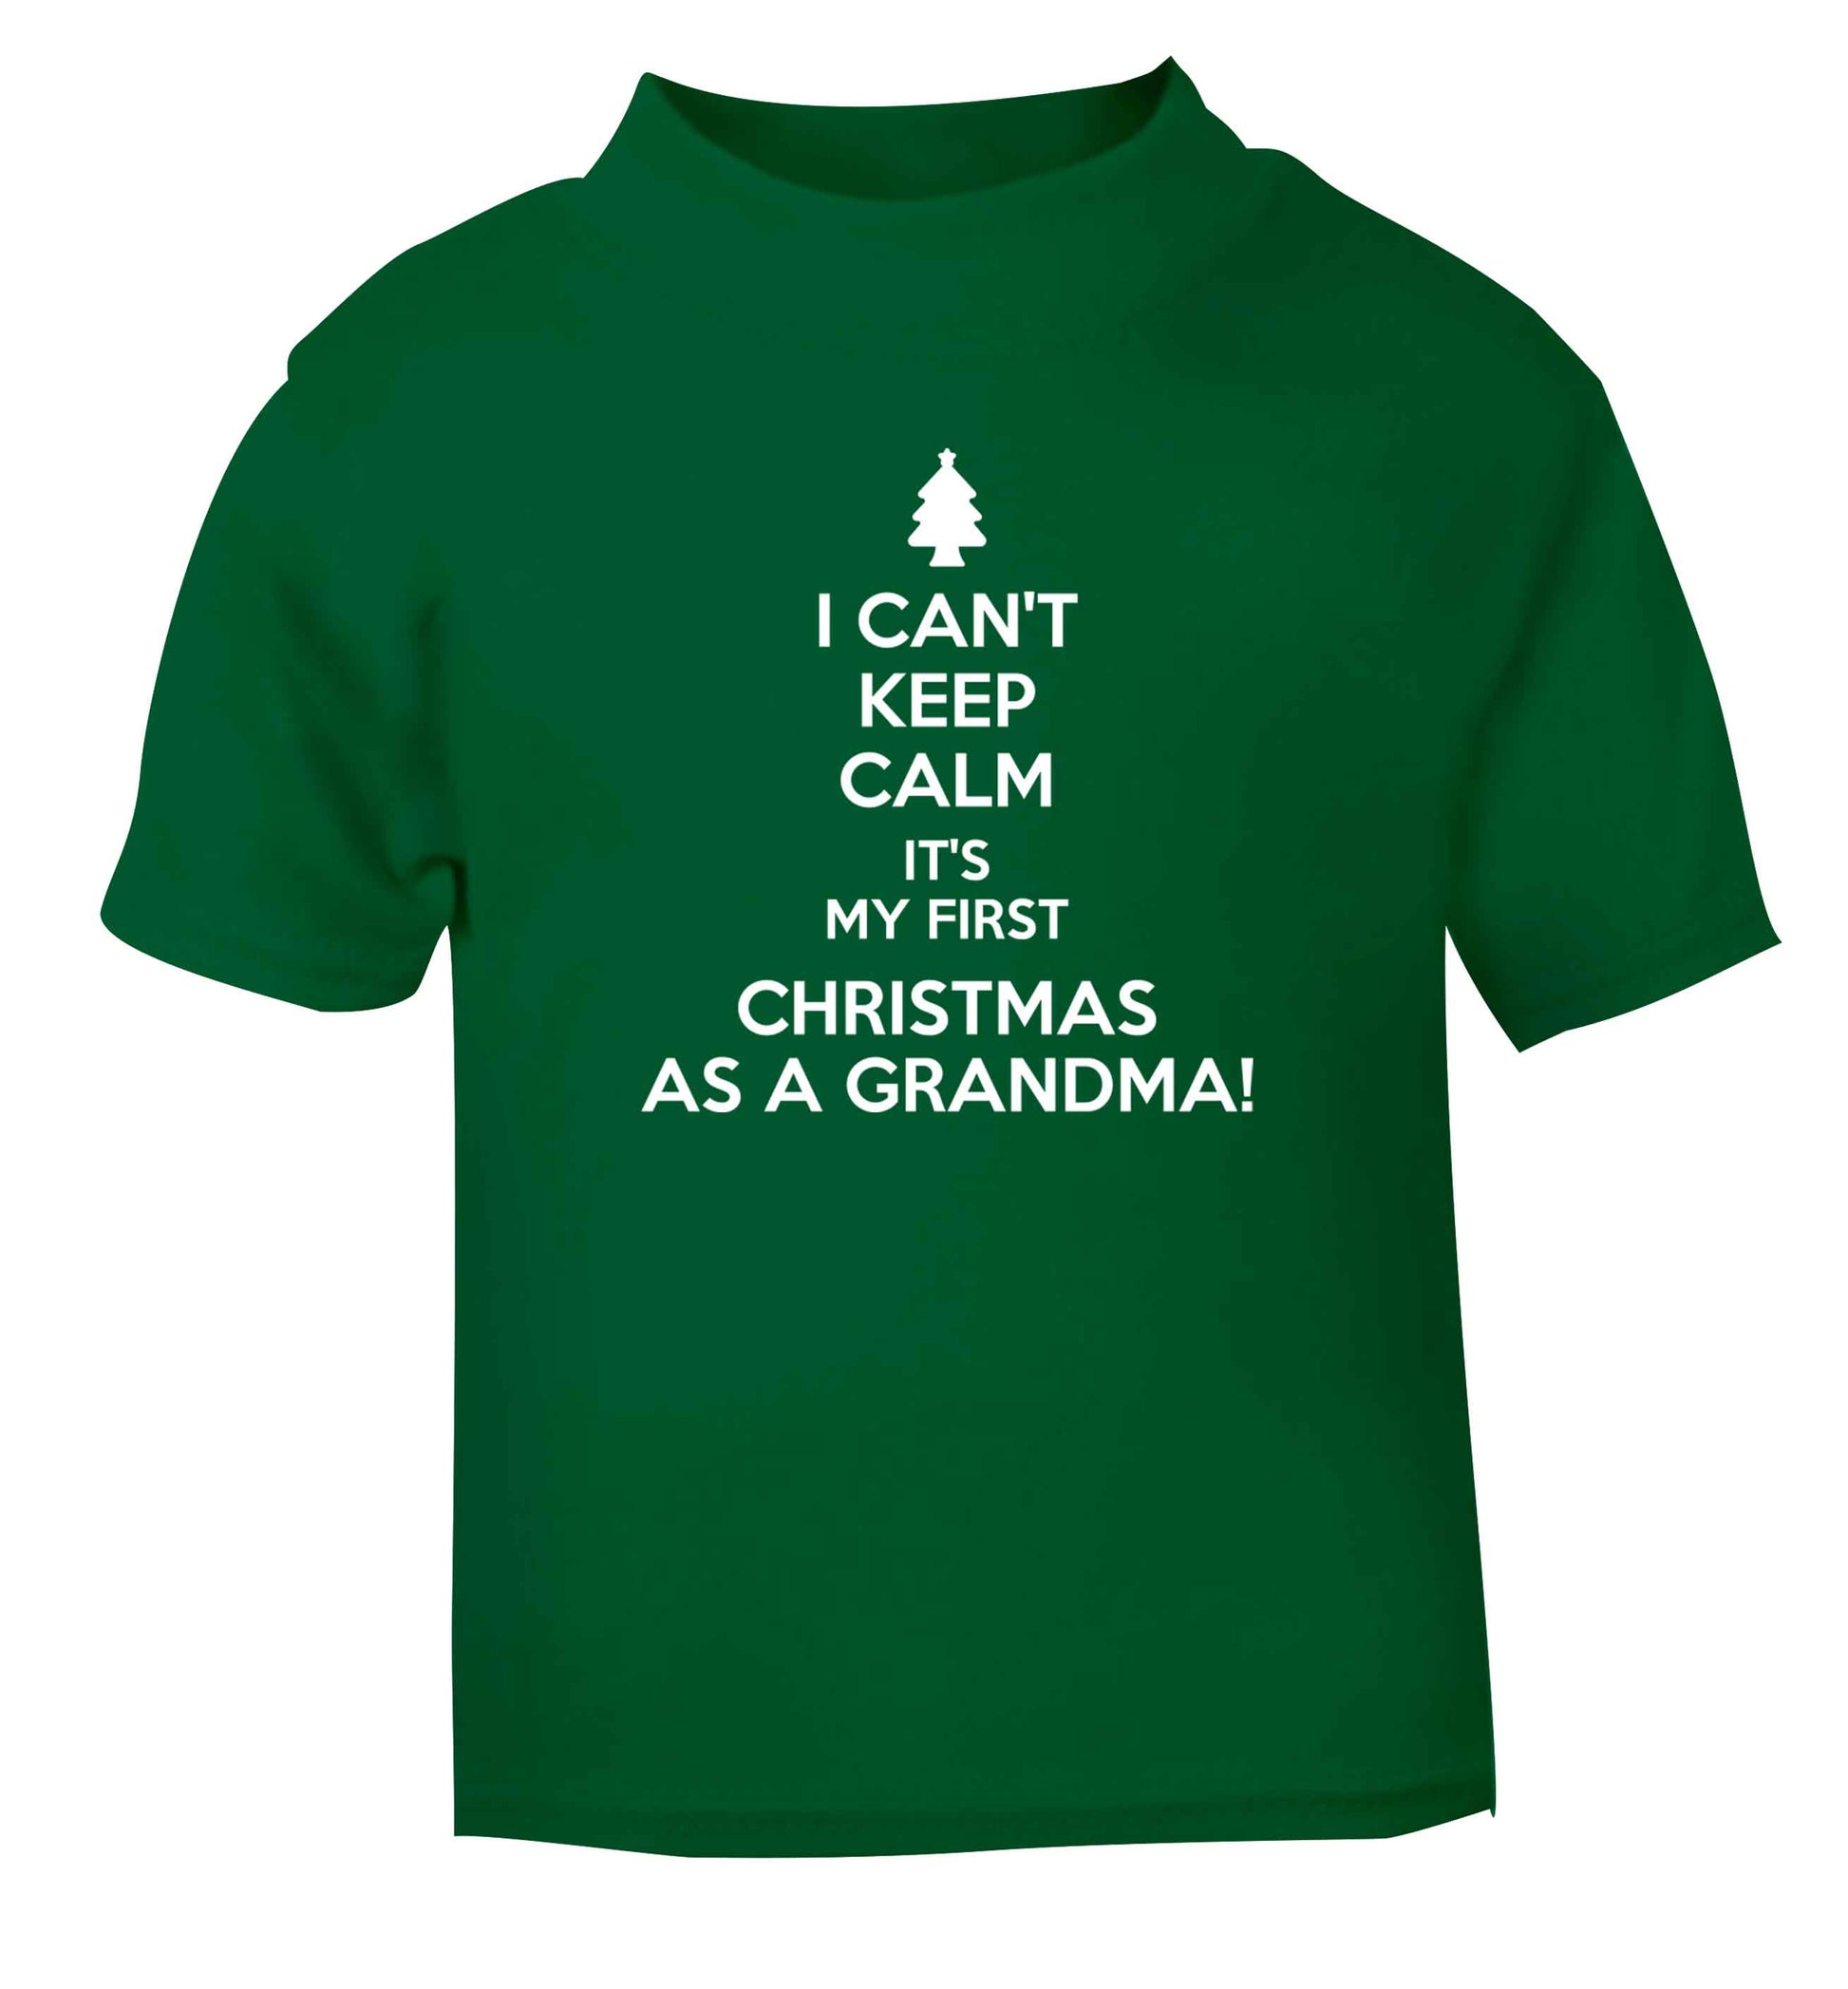 I can't keep calm it's my first Christmas as a grandma! green Baby Toddler Tshirt 2 Years